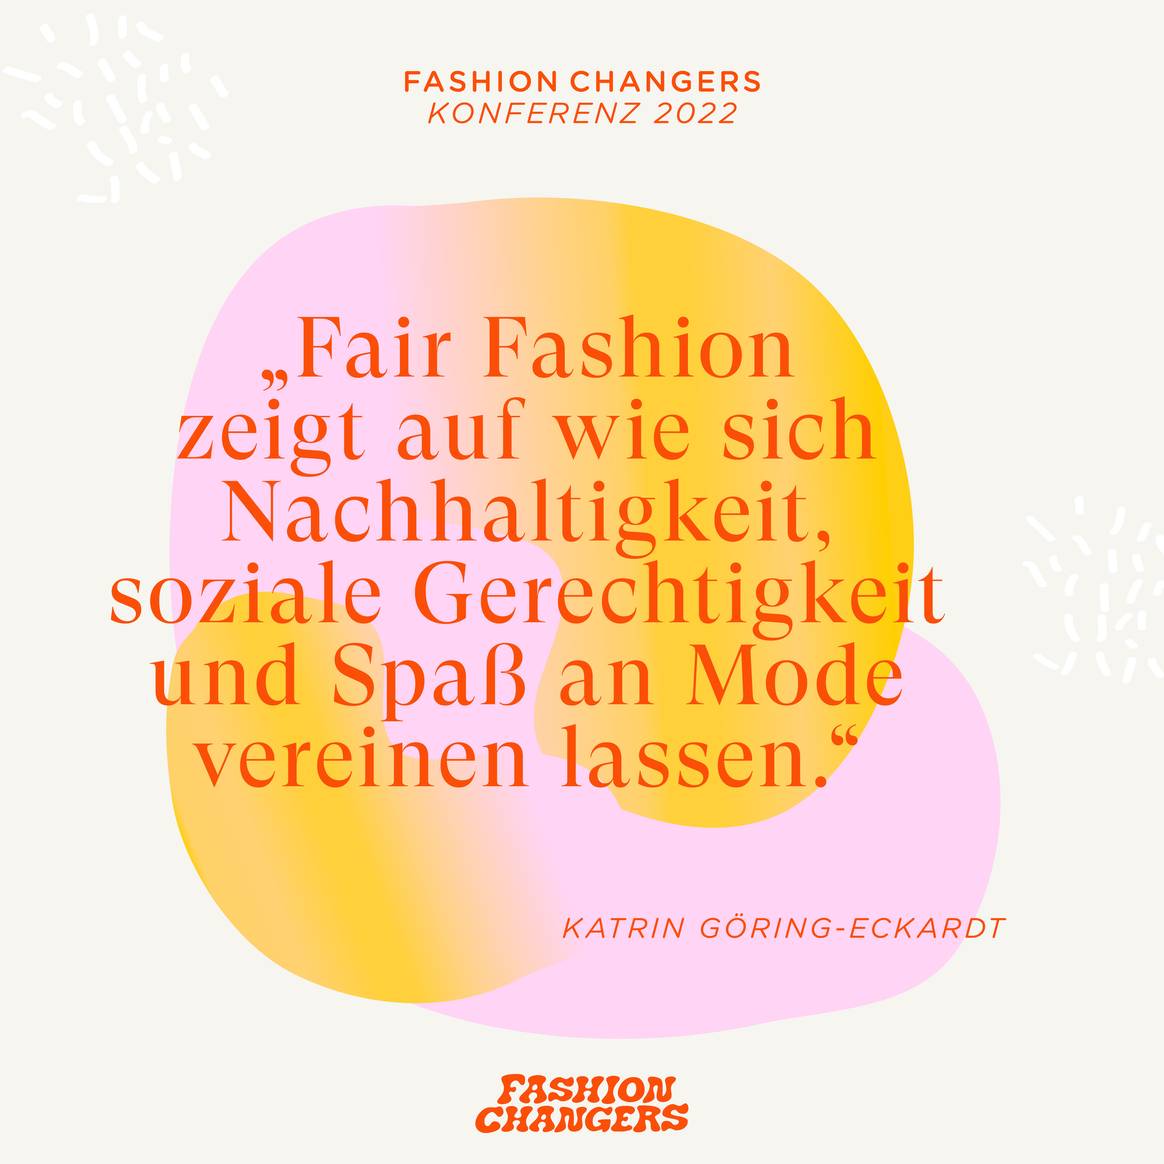 Quote by politician Katrin Göring-Eckardt. Image: Fashion Changers